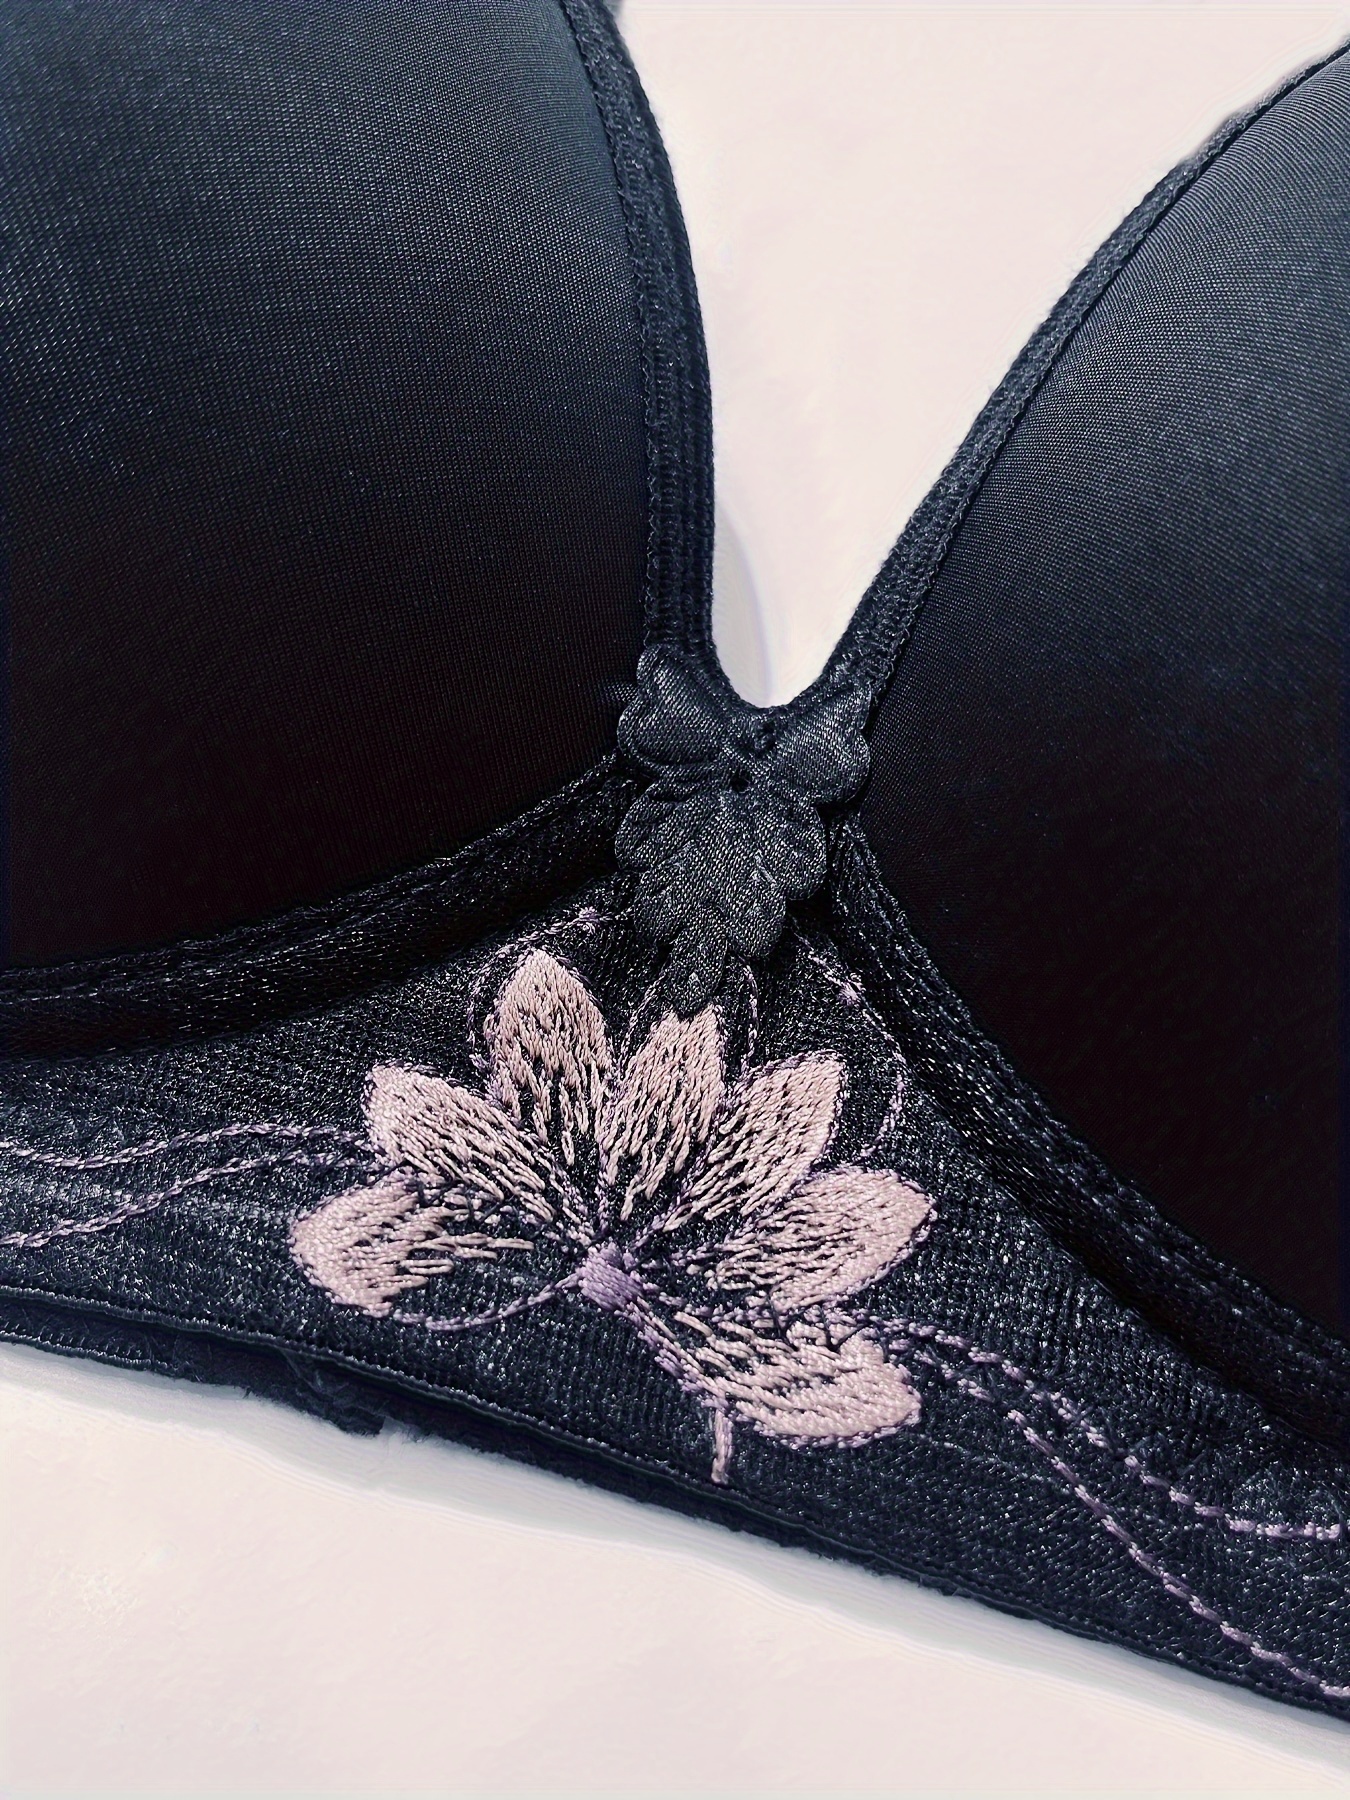 Floral Embroidery Push-Up Bra